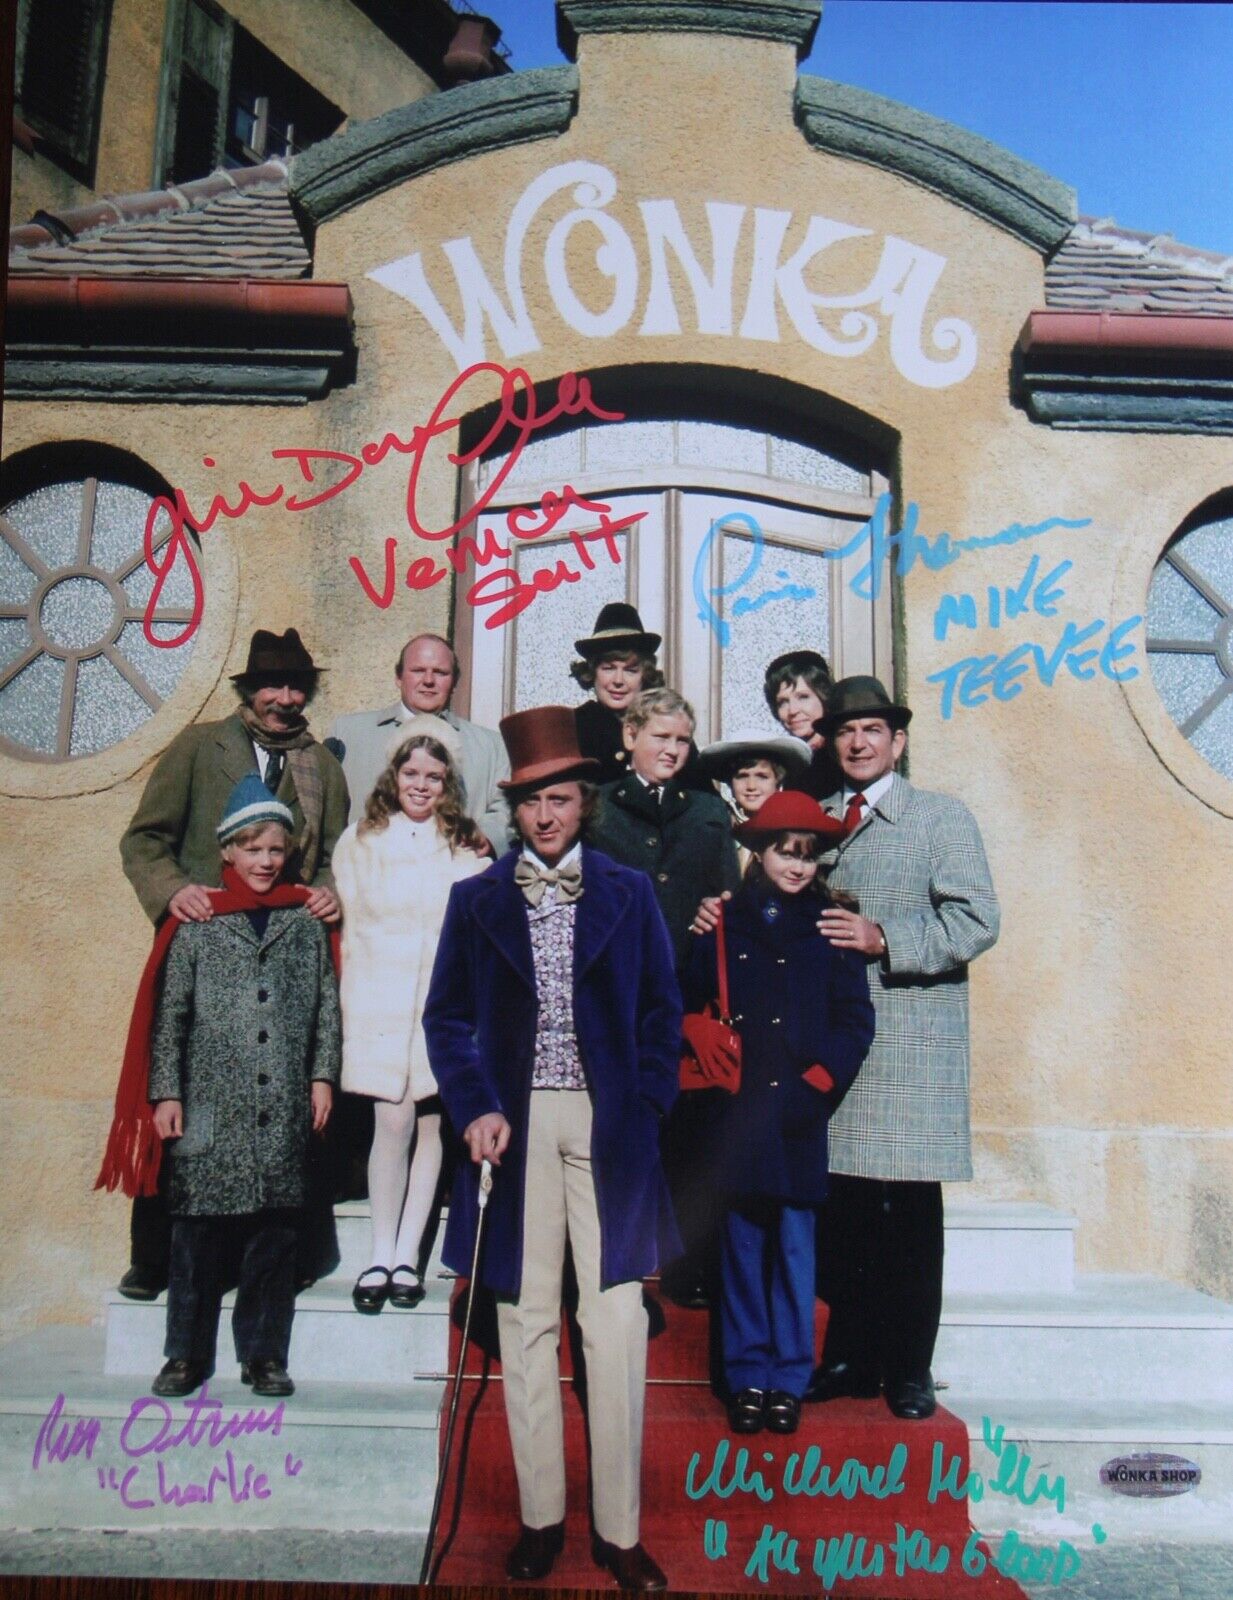 OUTSIDE THE WILLY WONKA FACTORY  PHOTO - AUTOGRAPHED, SIGNED BY FOUR 11” X 14” 